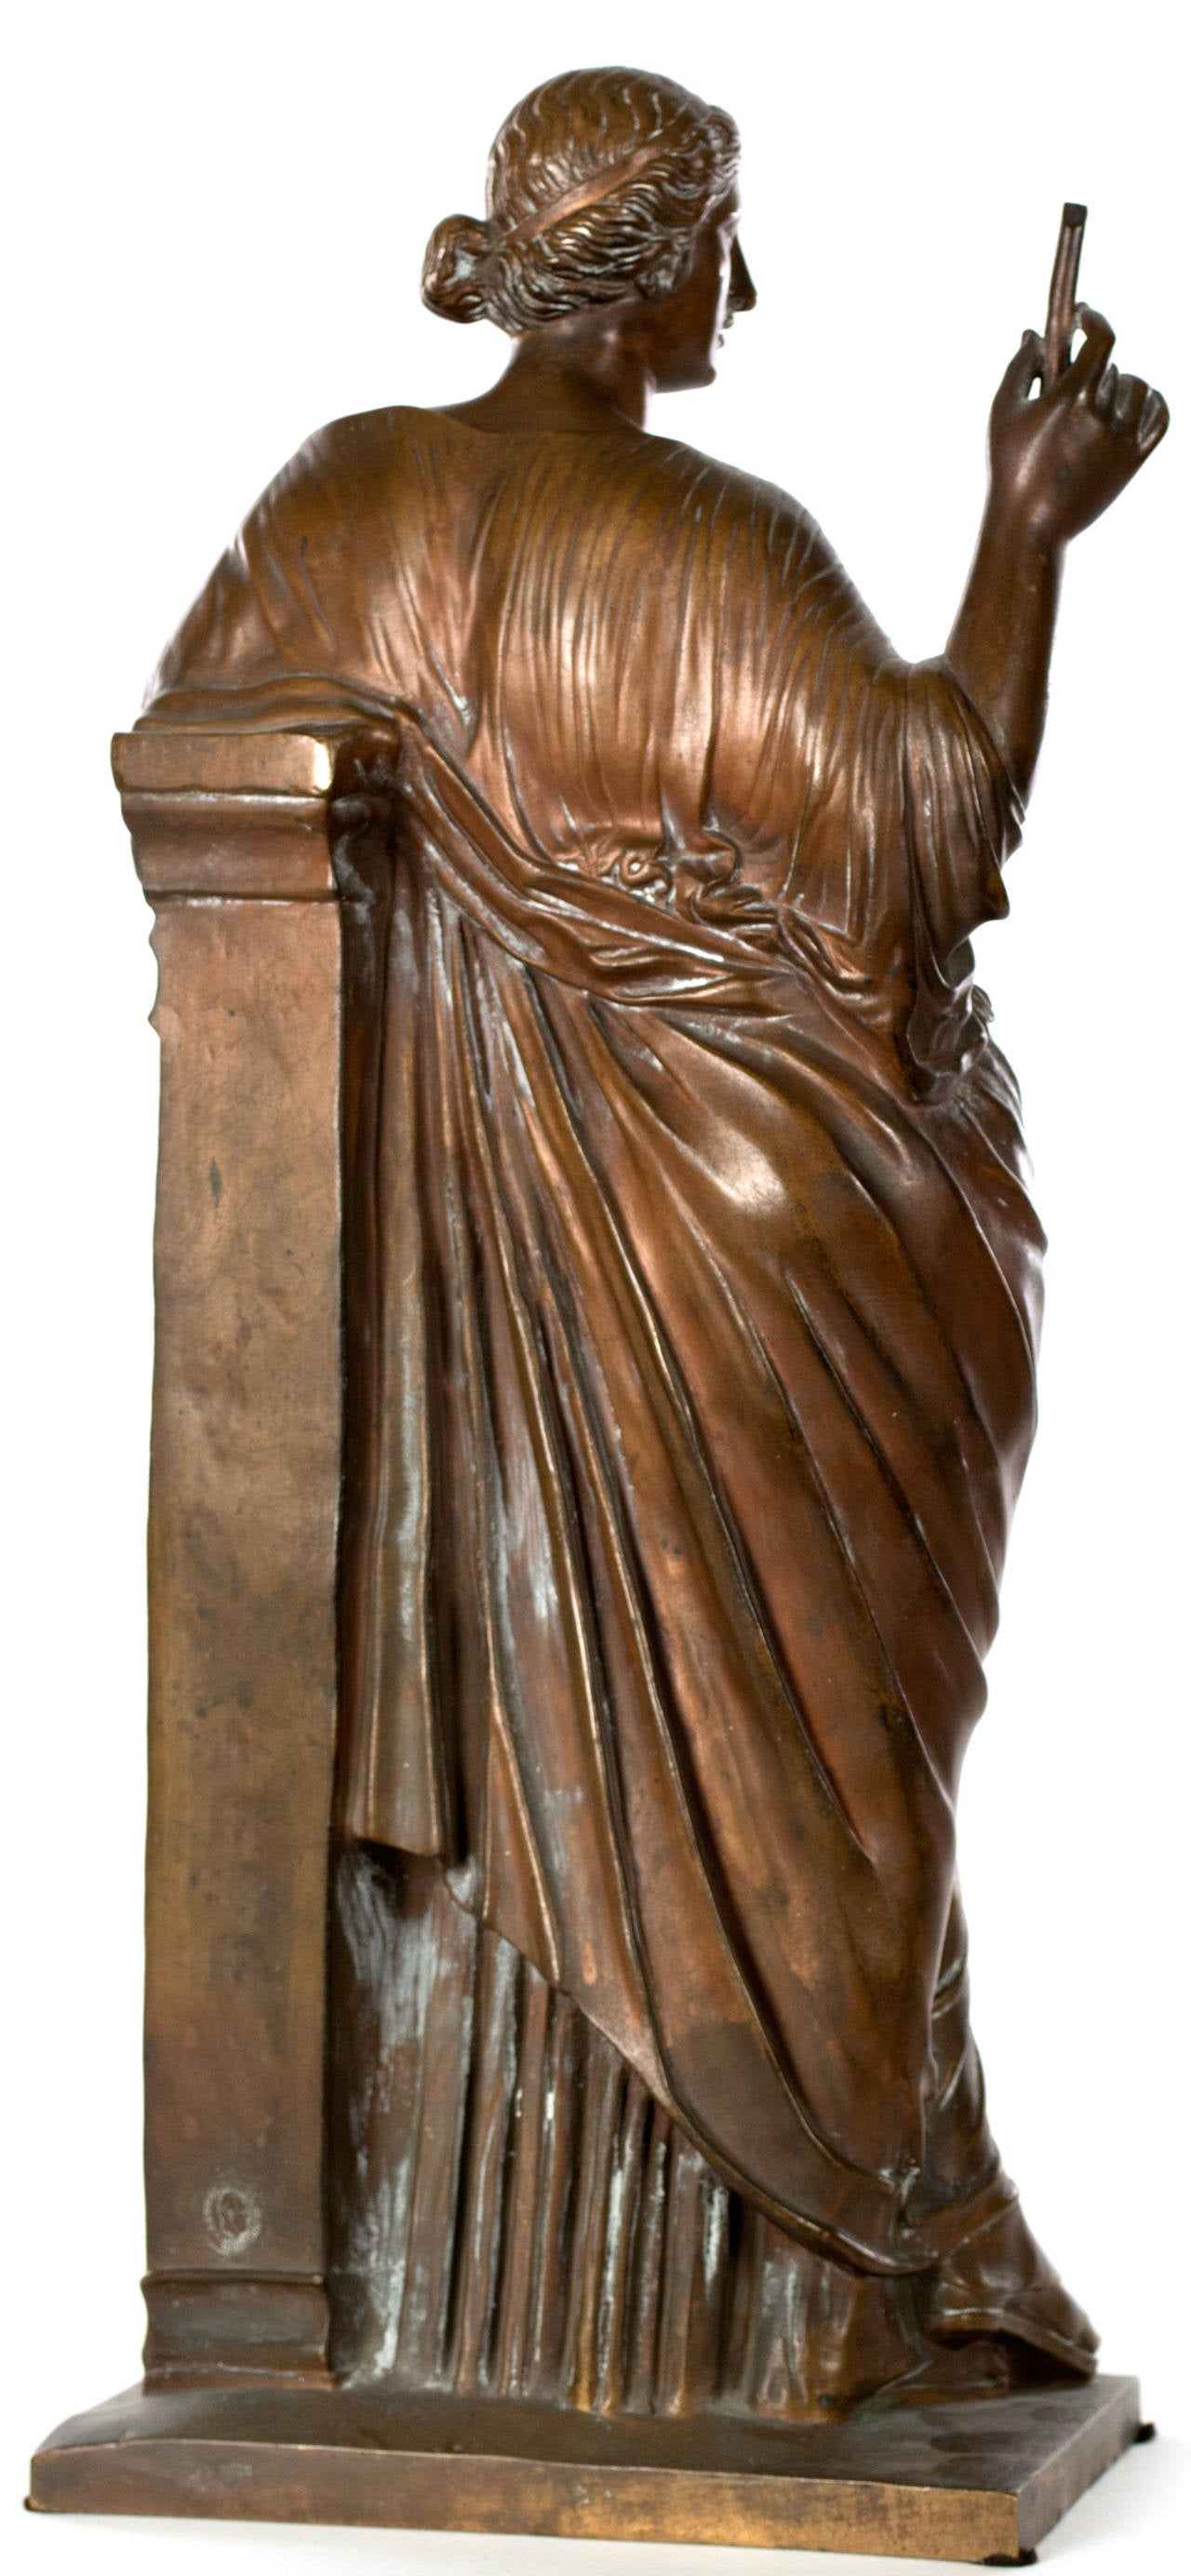 A fine bronze, cast by the renowned French foundry Barbedienne, of the mythical Greek muse Euterpe. The nine Muses were each daughters of Zeus and led by Apollo, the God of light and truth. Each Muse was responsible for inspiring mortals with